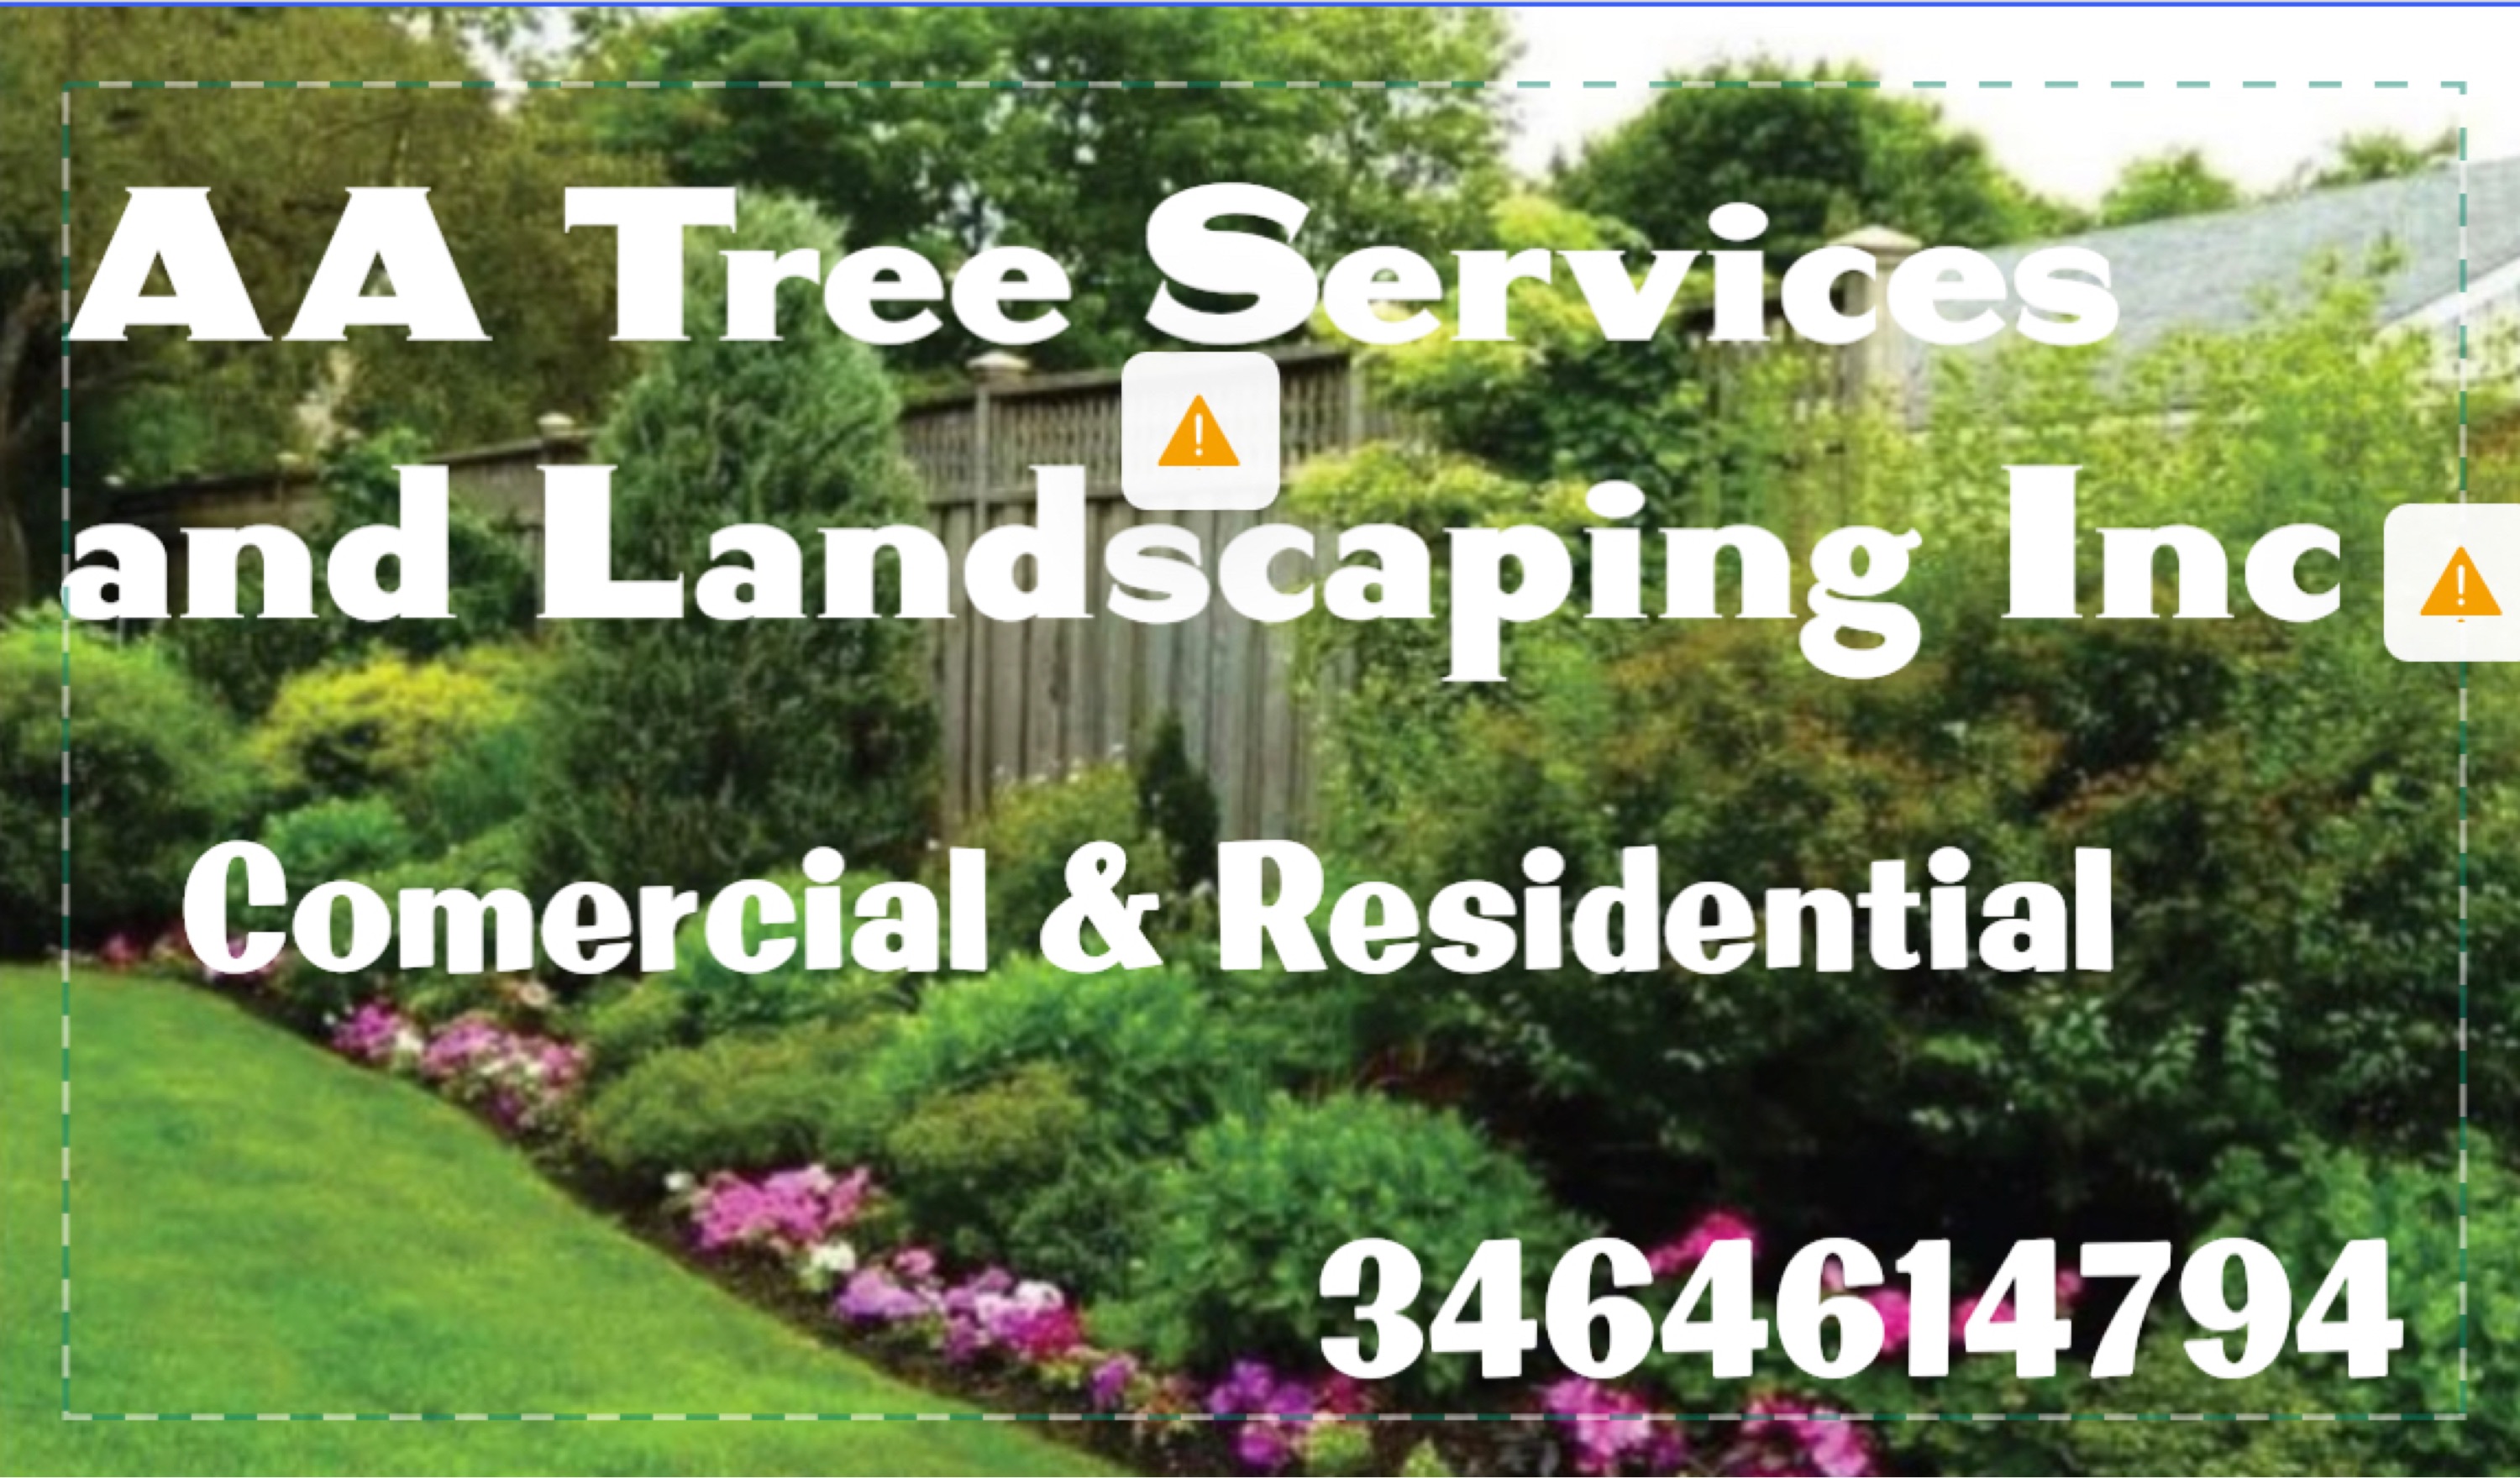 AA Tree Services and Landscaping, Inc. Logo